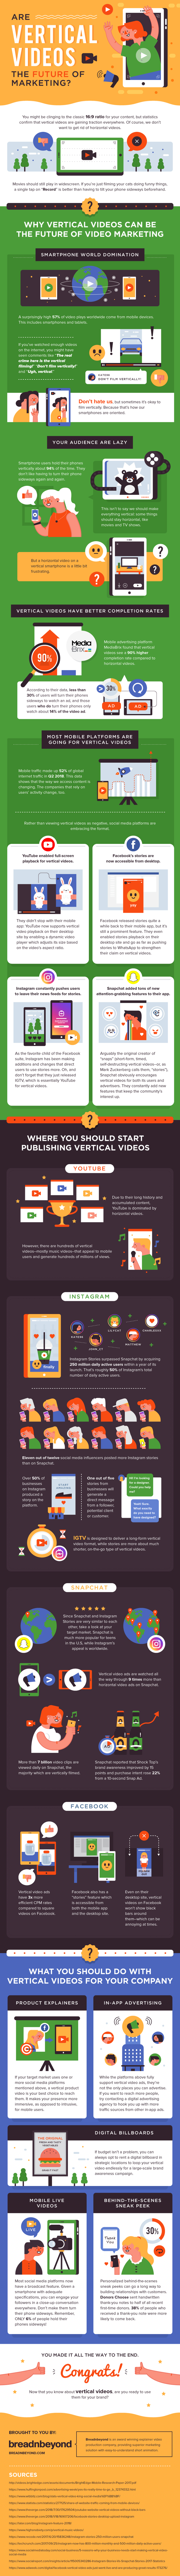 Vertical Videos for Marketing Infographic